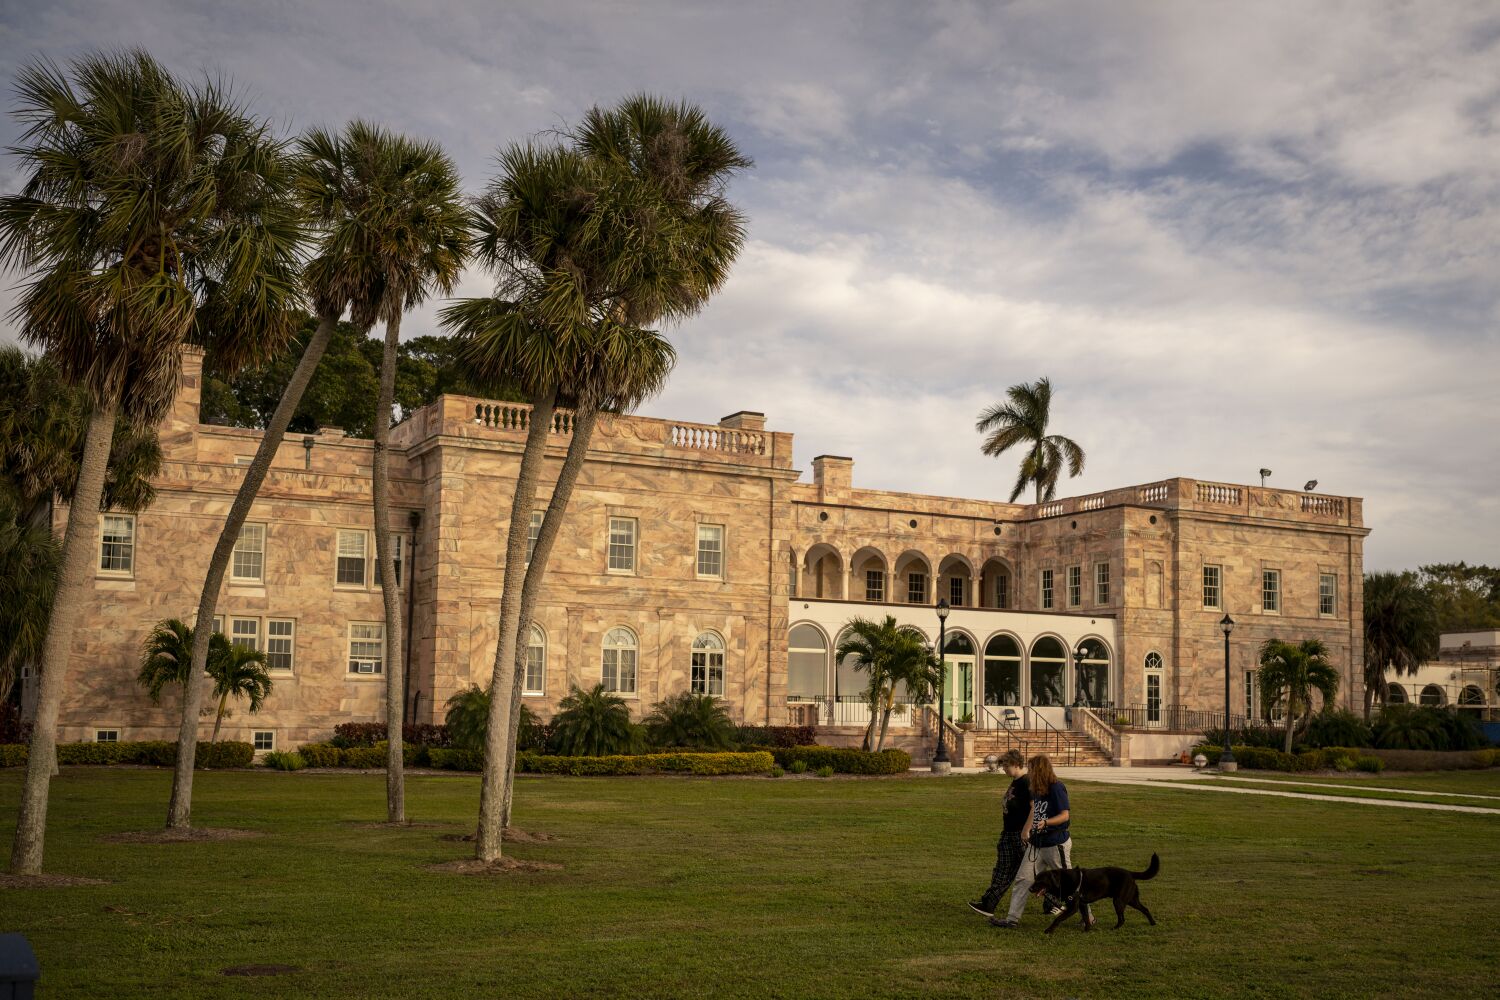 Inside the small liberal arts college that Florida Gov. Ron DeSantis wants to take over